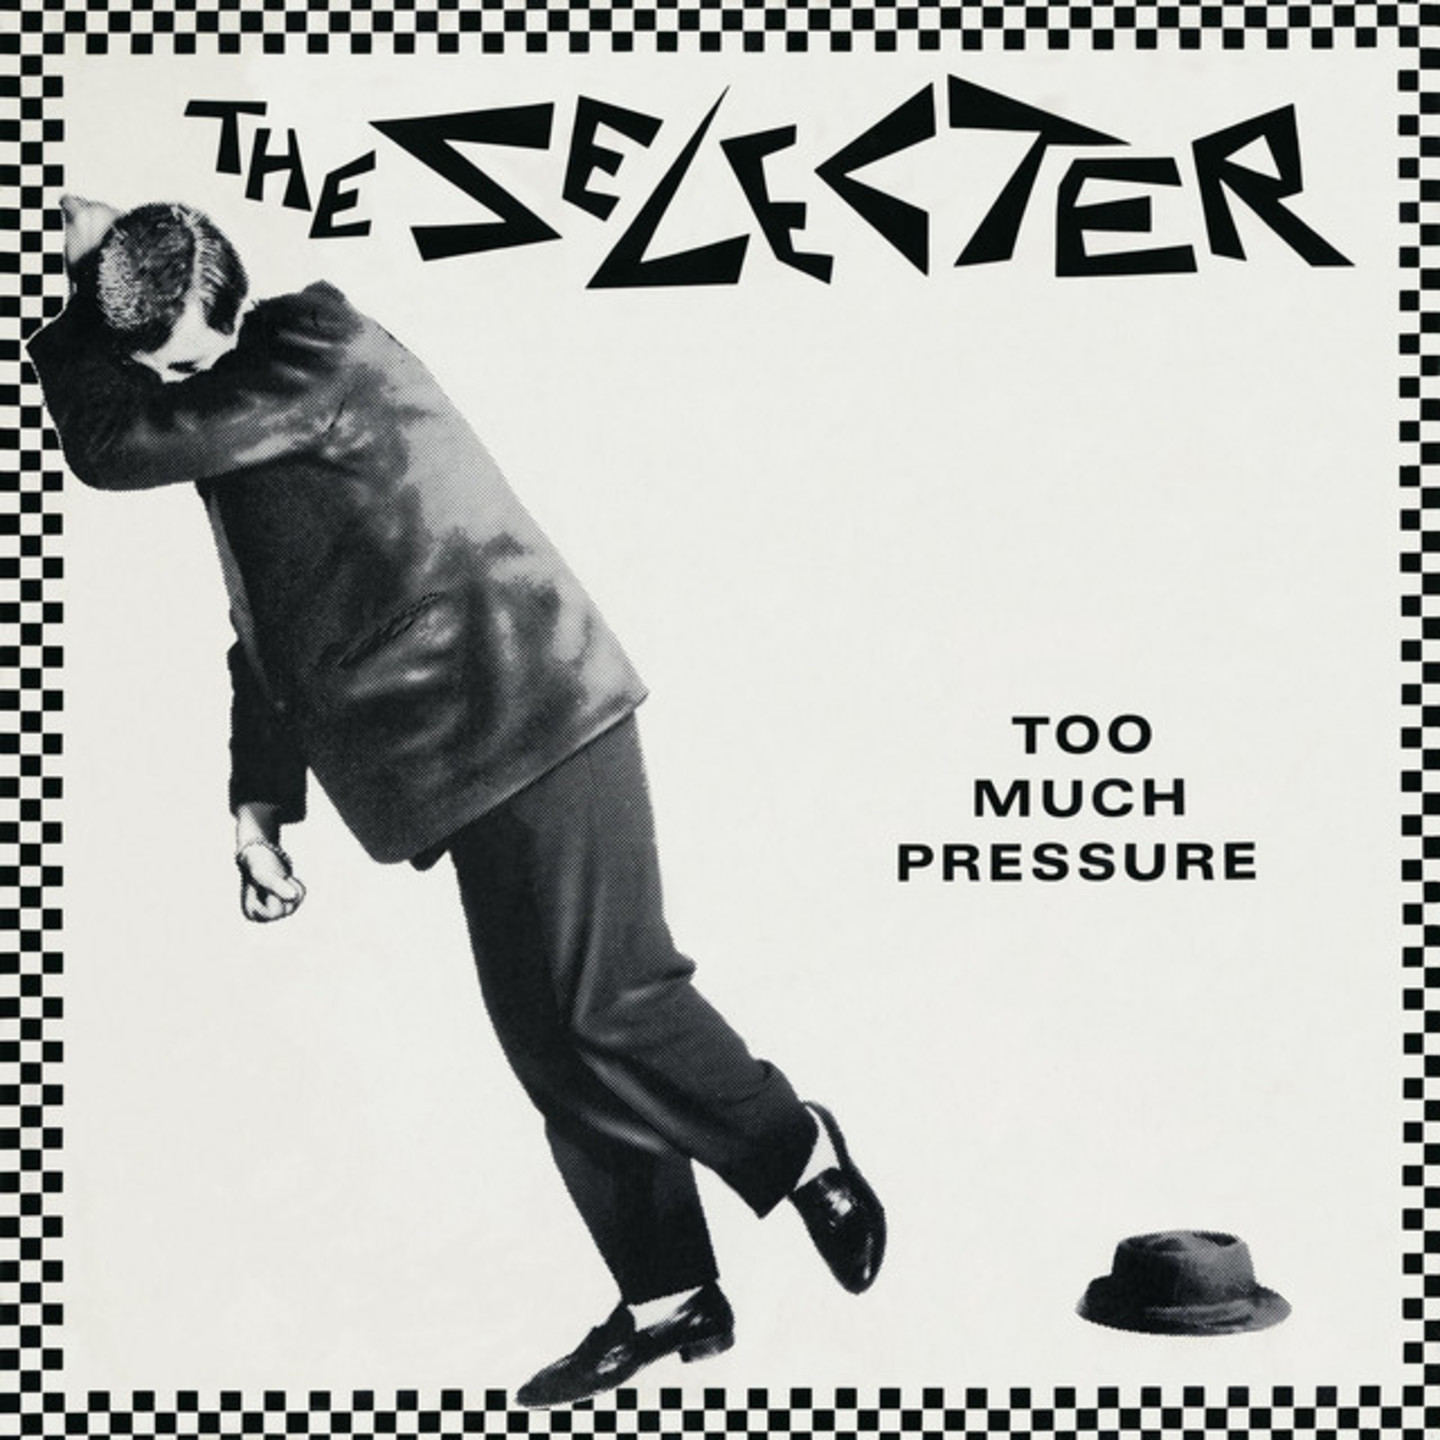 SELECTER, THE - Too Much Pressure LP+7" (40th Anniversary Edition)